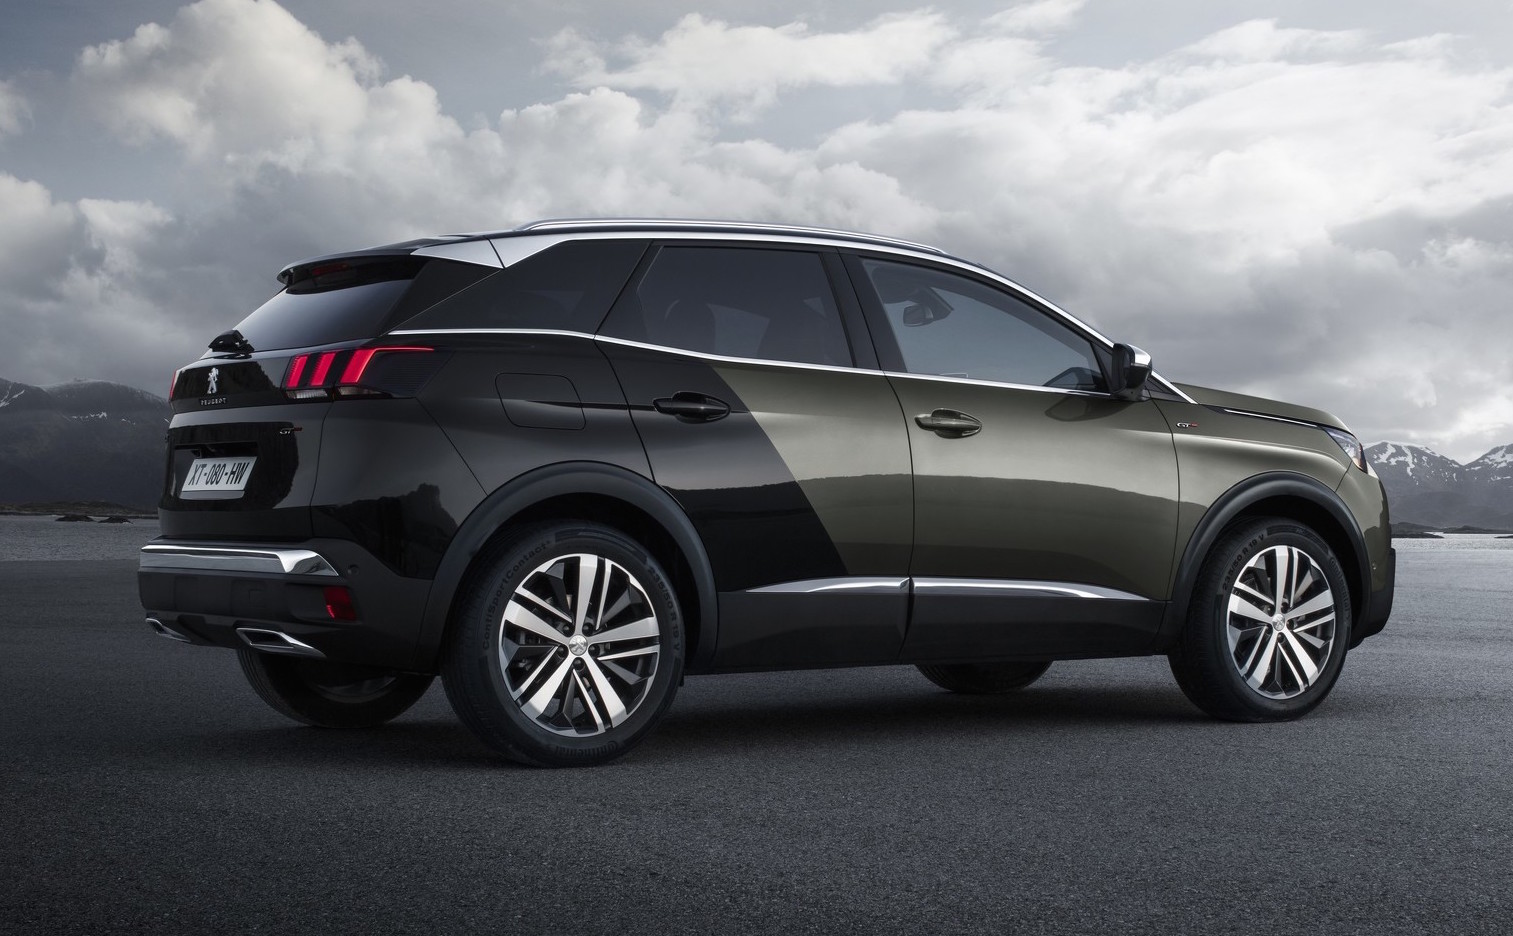 2017 Peugeot 3008 GT revealed, first ever 'GT' SUV